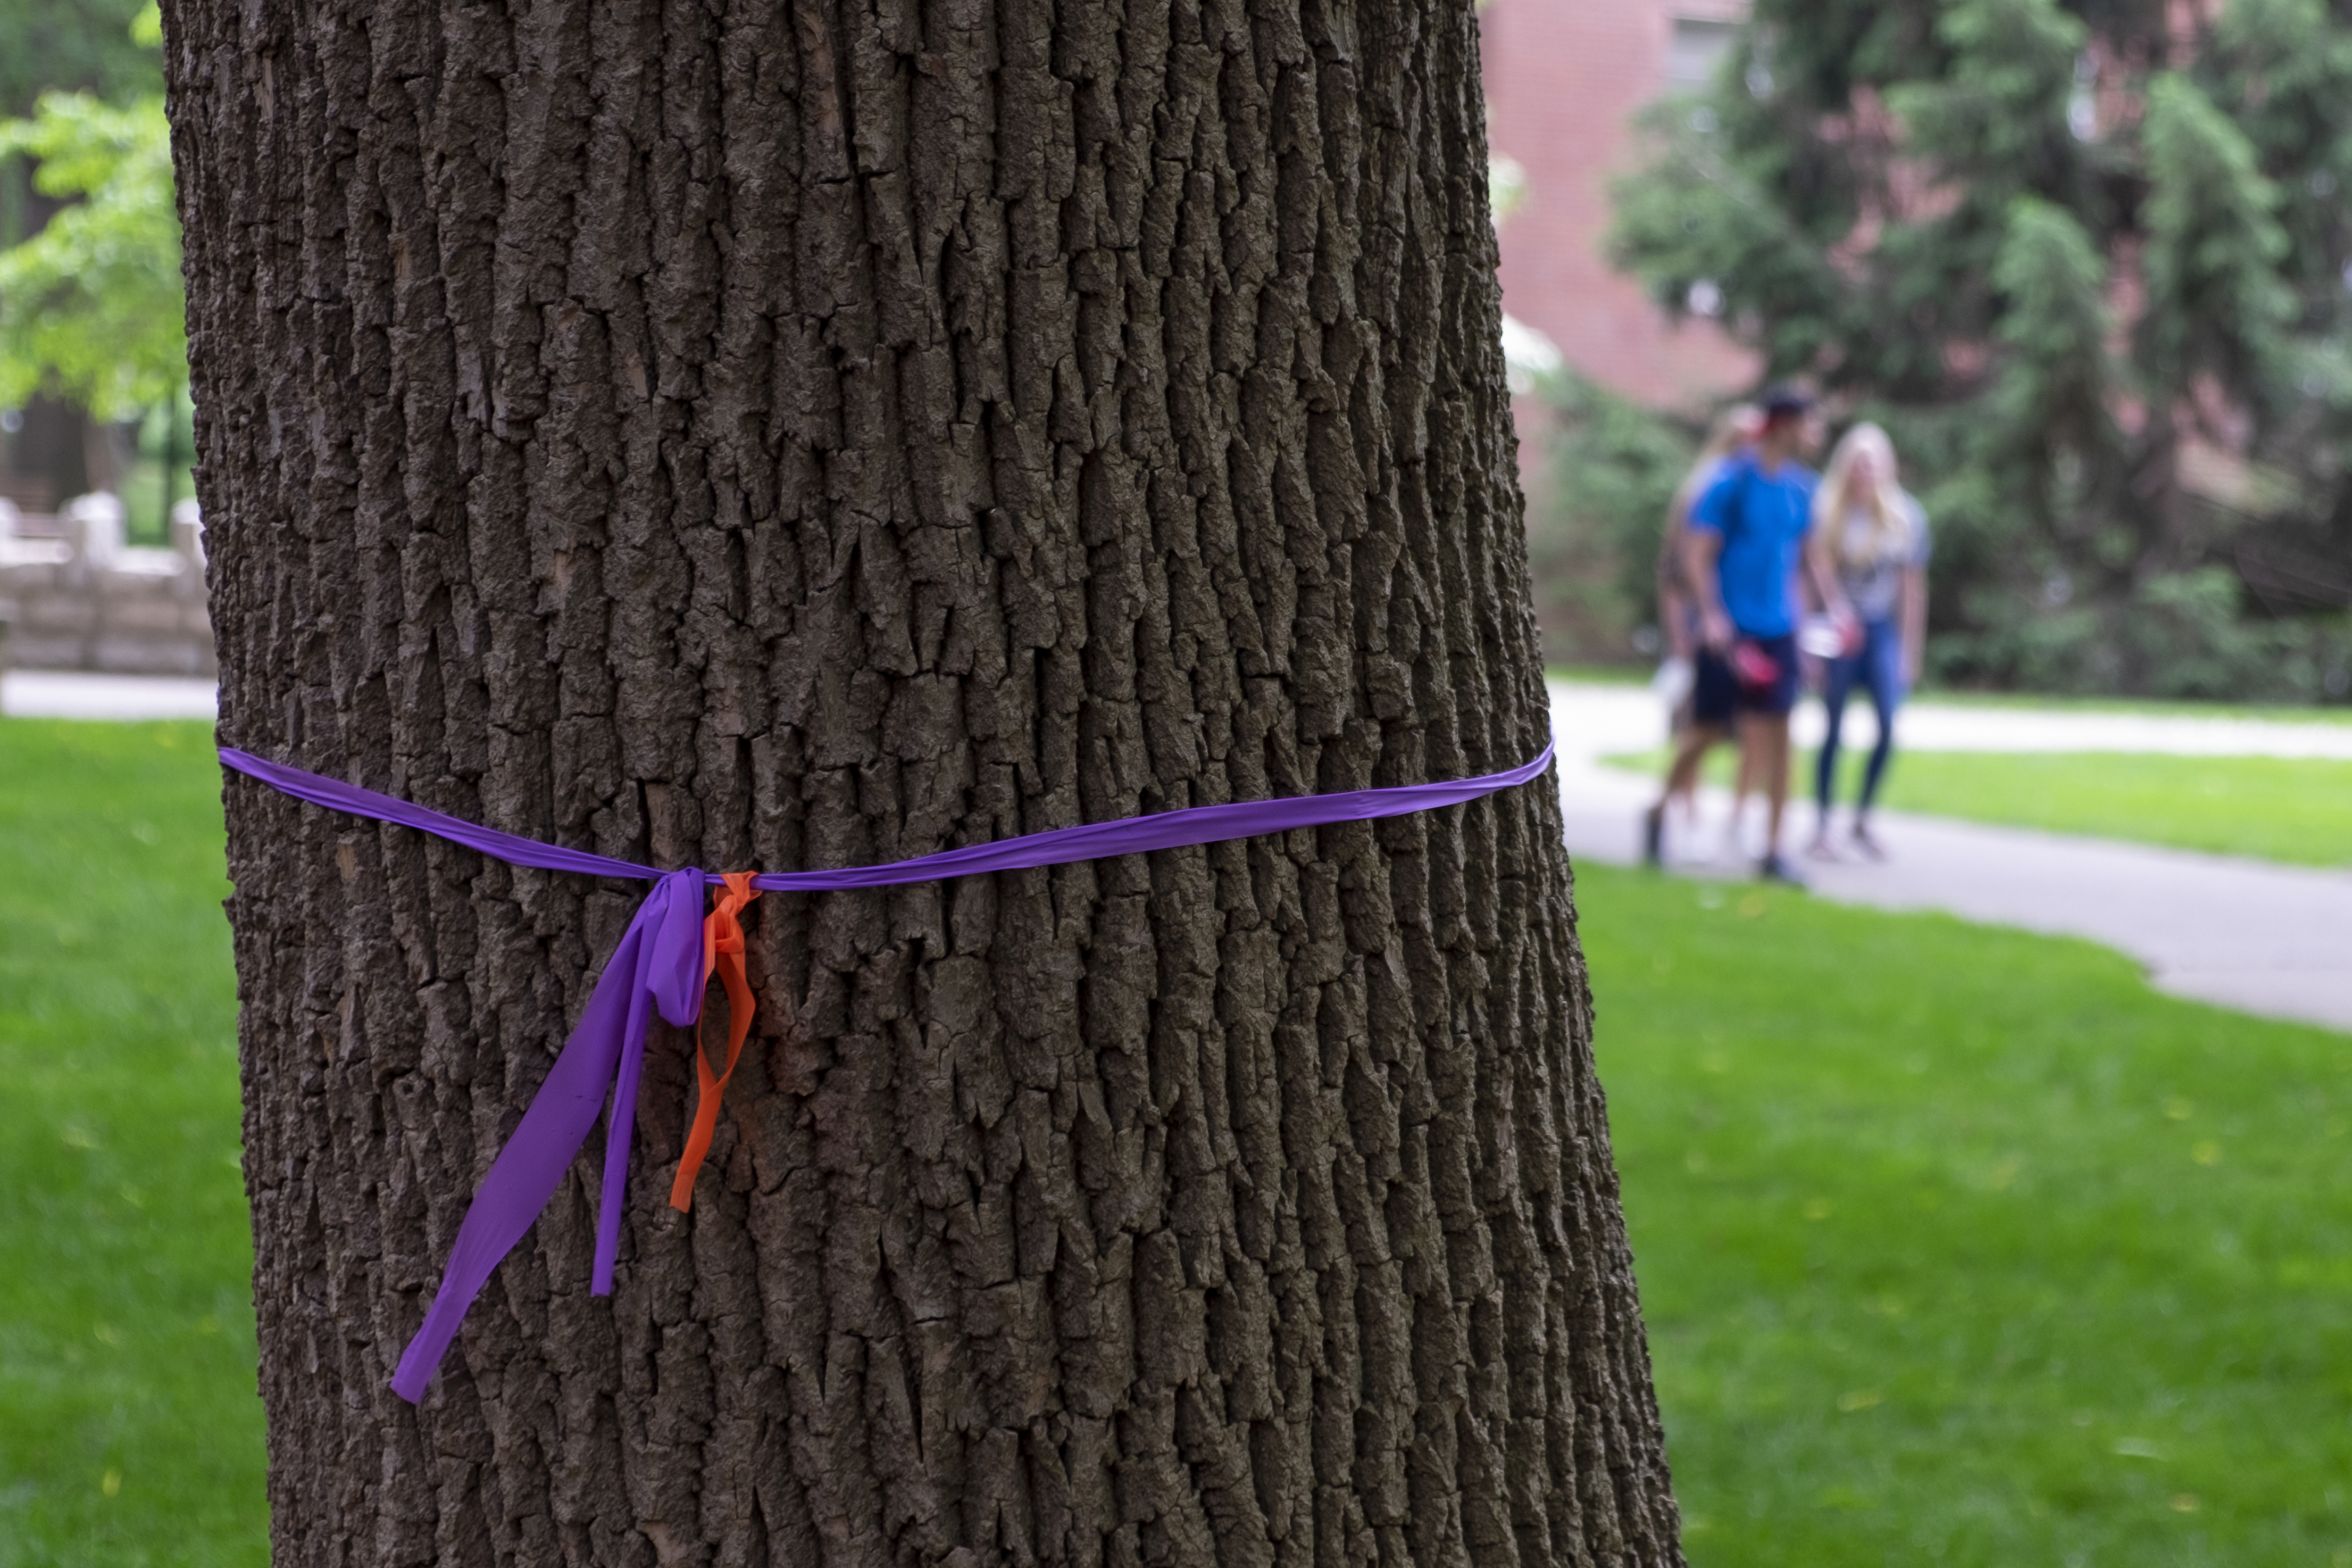 Ash trees like this one on Belknap Campus are being treated to protect them from the emerald ash borer.